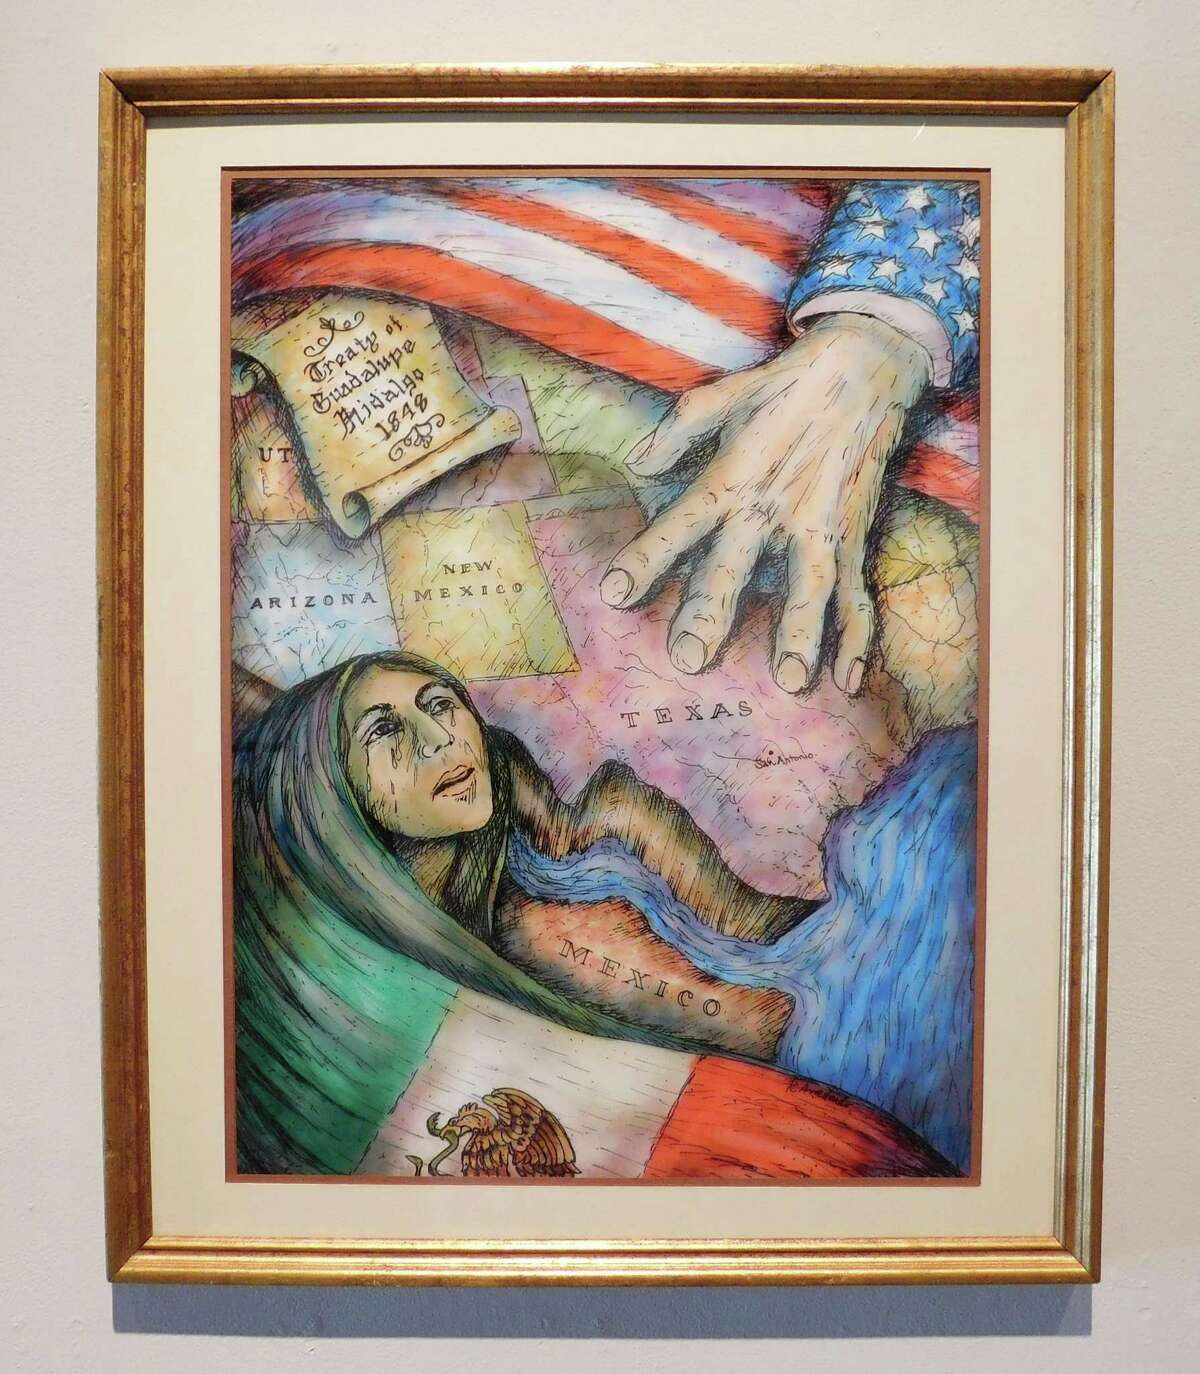 “Our Heartland Broken Apart” by Richard Arredondo is part of the Segundo de Febrero exhibit that opens Friday at Centro Cultural Aztlán. The 40th annual exhibit that marks the anniversary of the Treaty of Guadalupe Hidalgo runs through February at 1800 Fredericksburg Road, Suite 103.